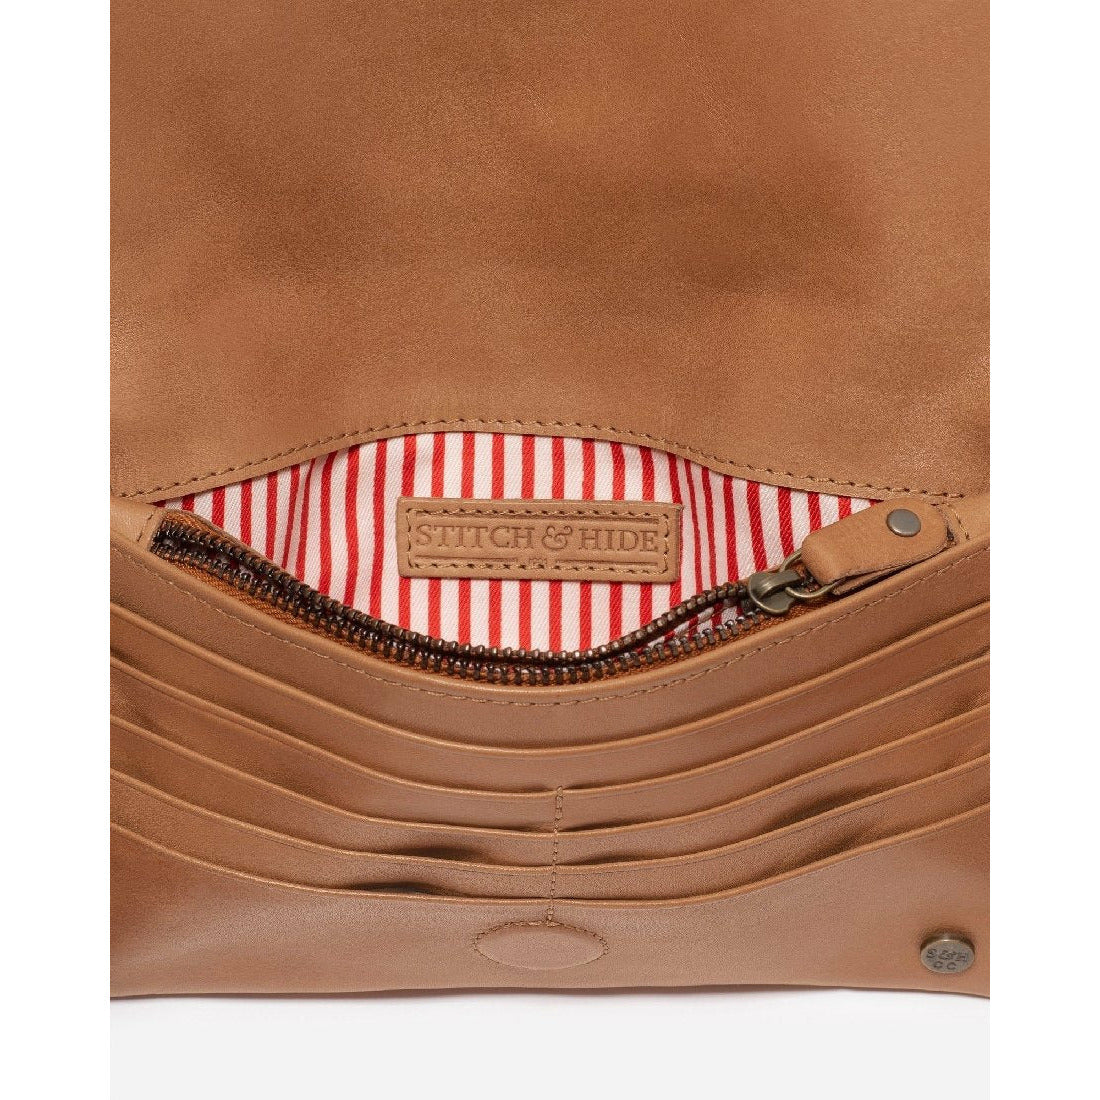 Stitch & Hide Darcy Classic Wallet - Little Extras Lifestyle Boutique